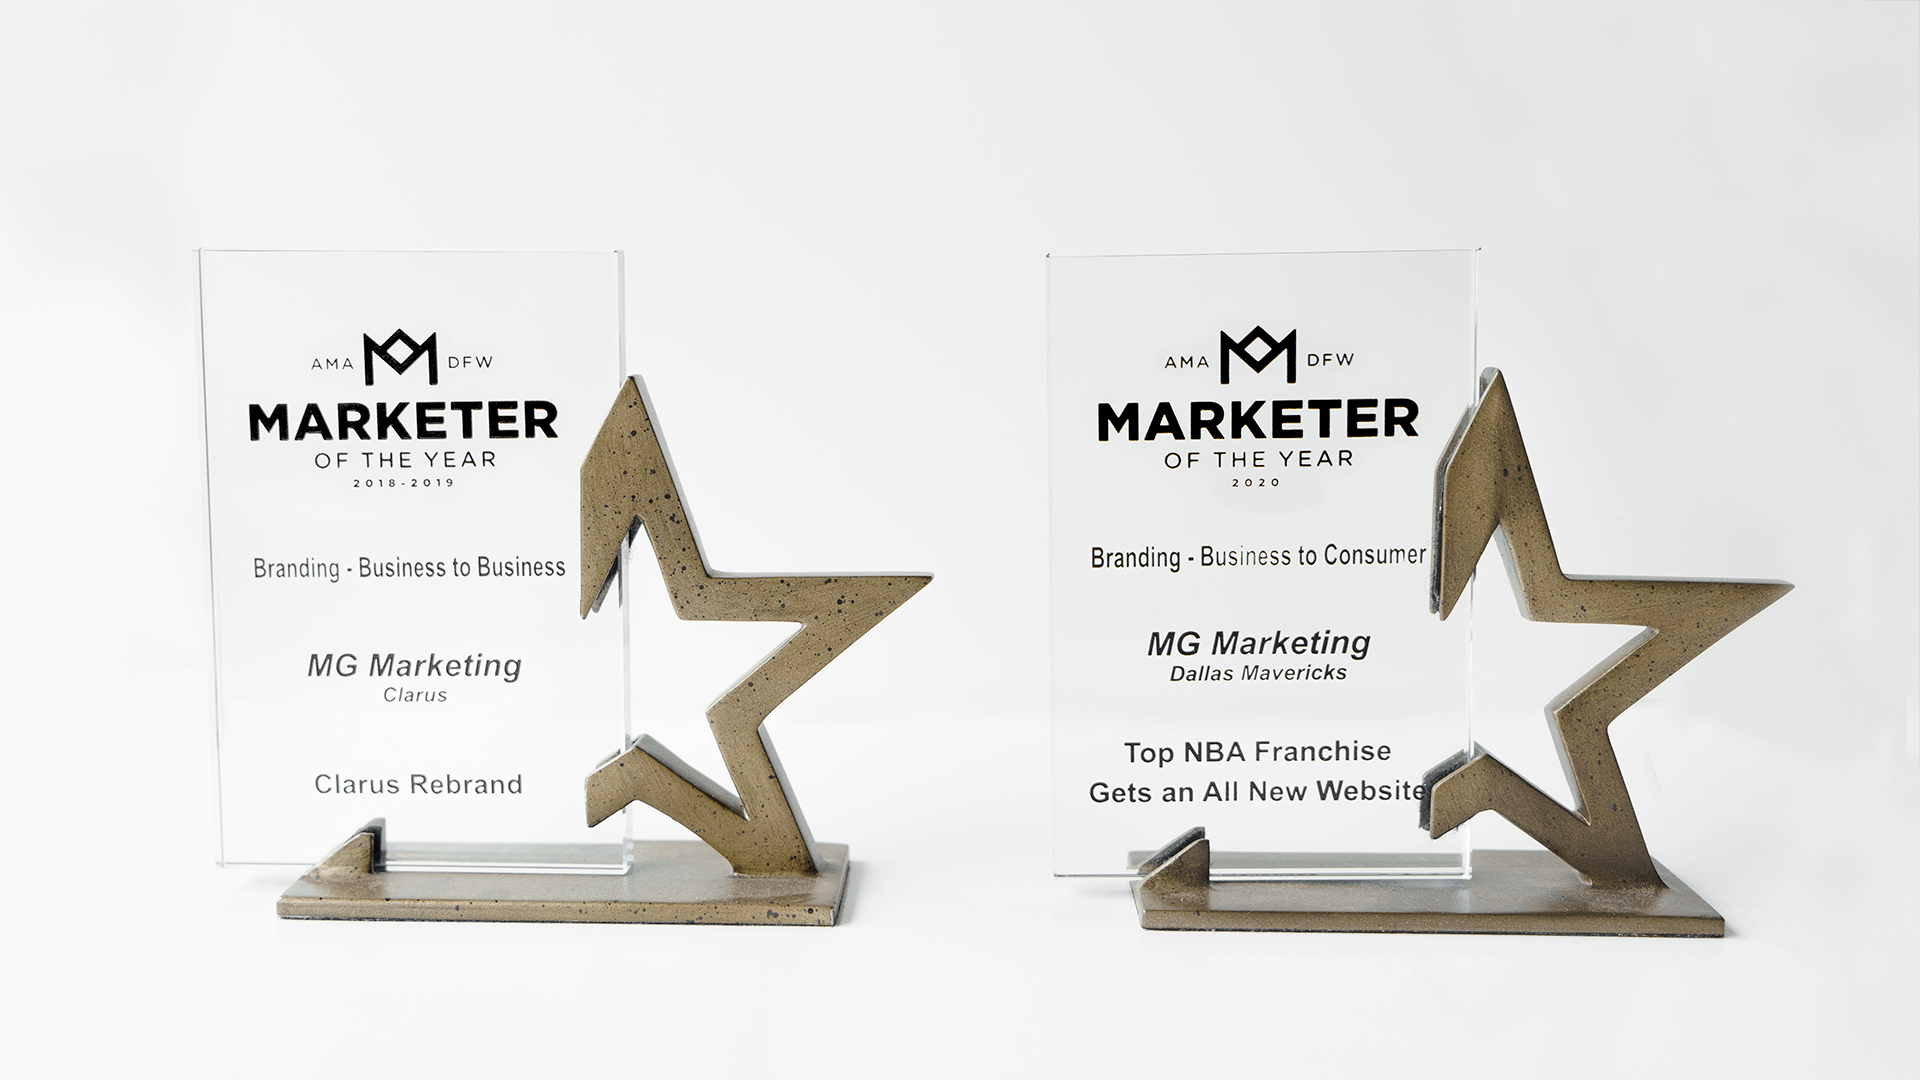 MG Marketing Wins Marketer of The Year Again!